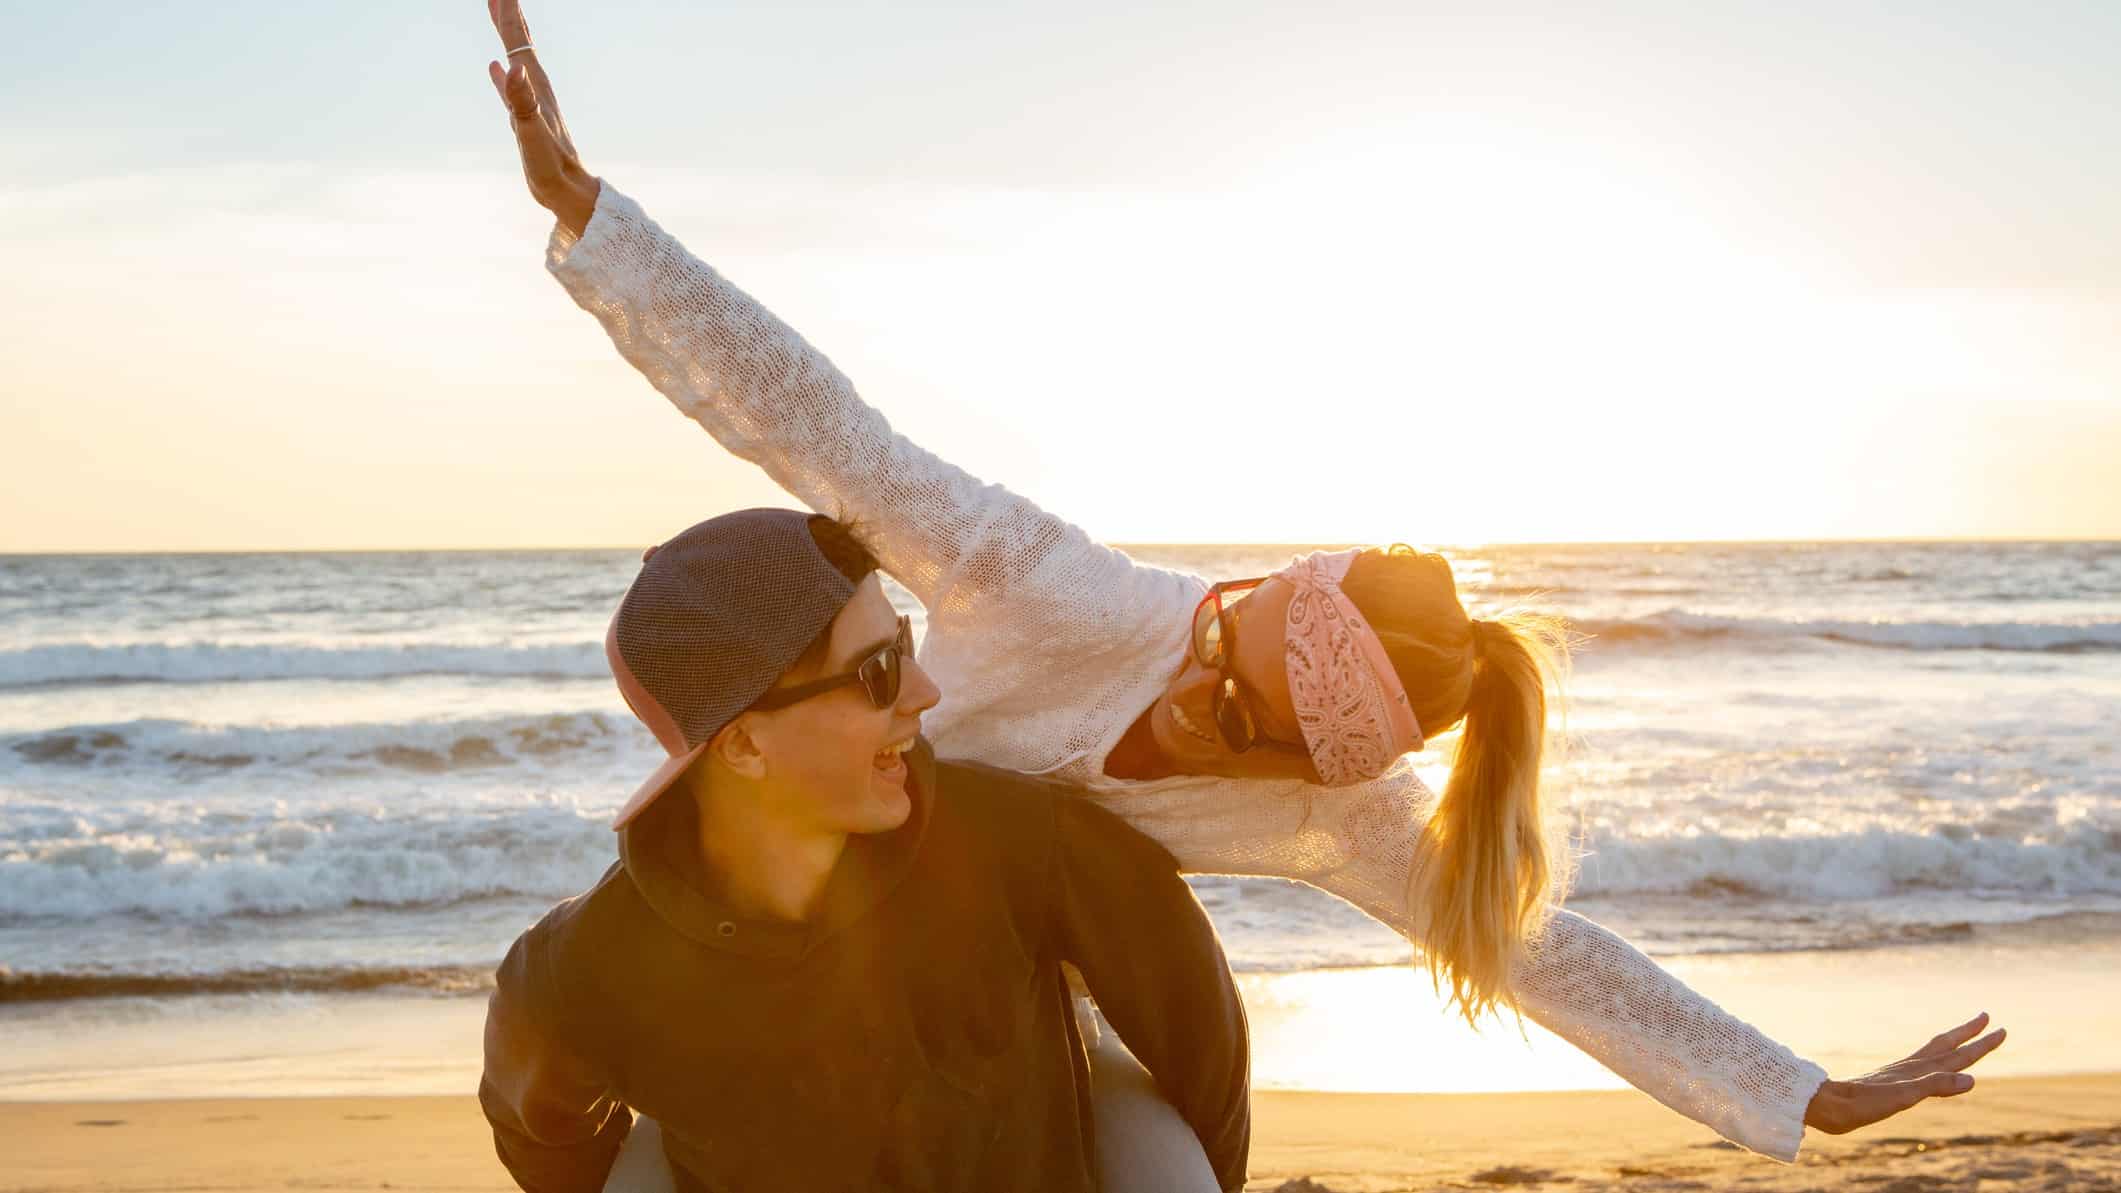 A happy woman flies with arms outstretched on her boyfriend's back on the beach at dusk.